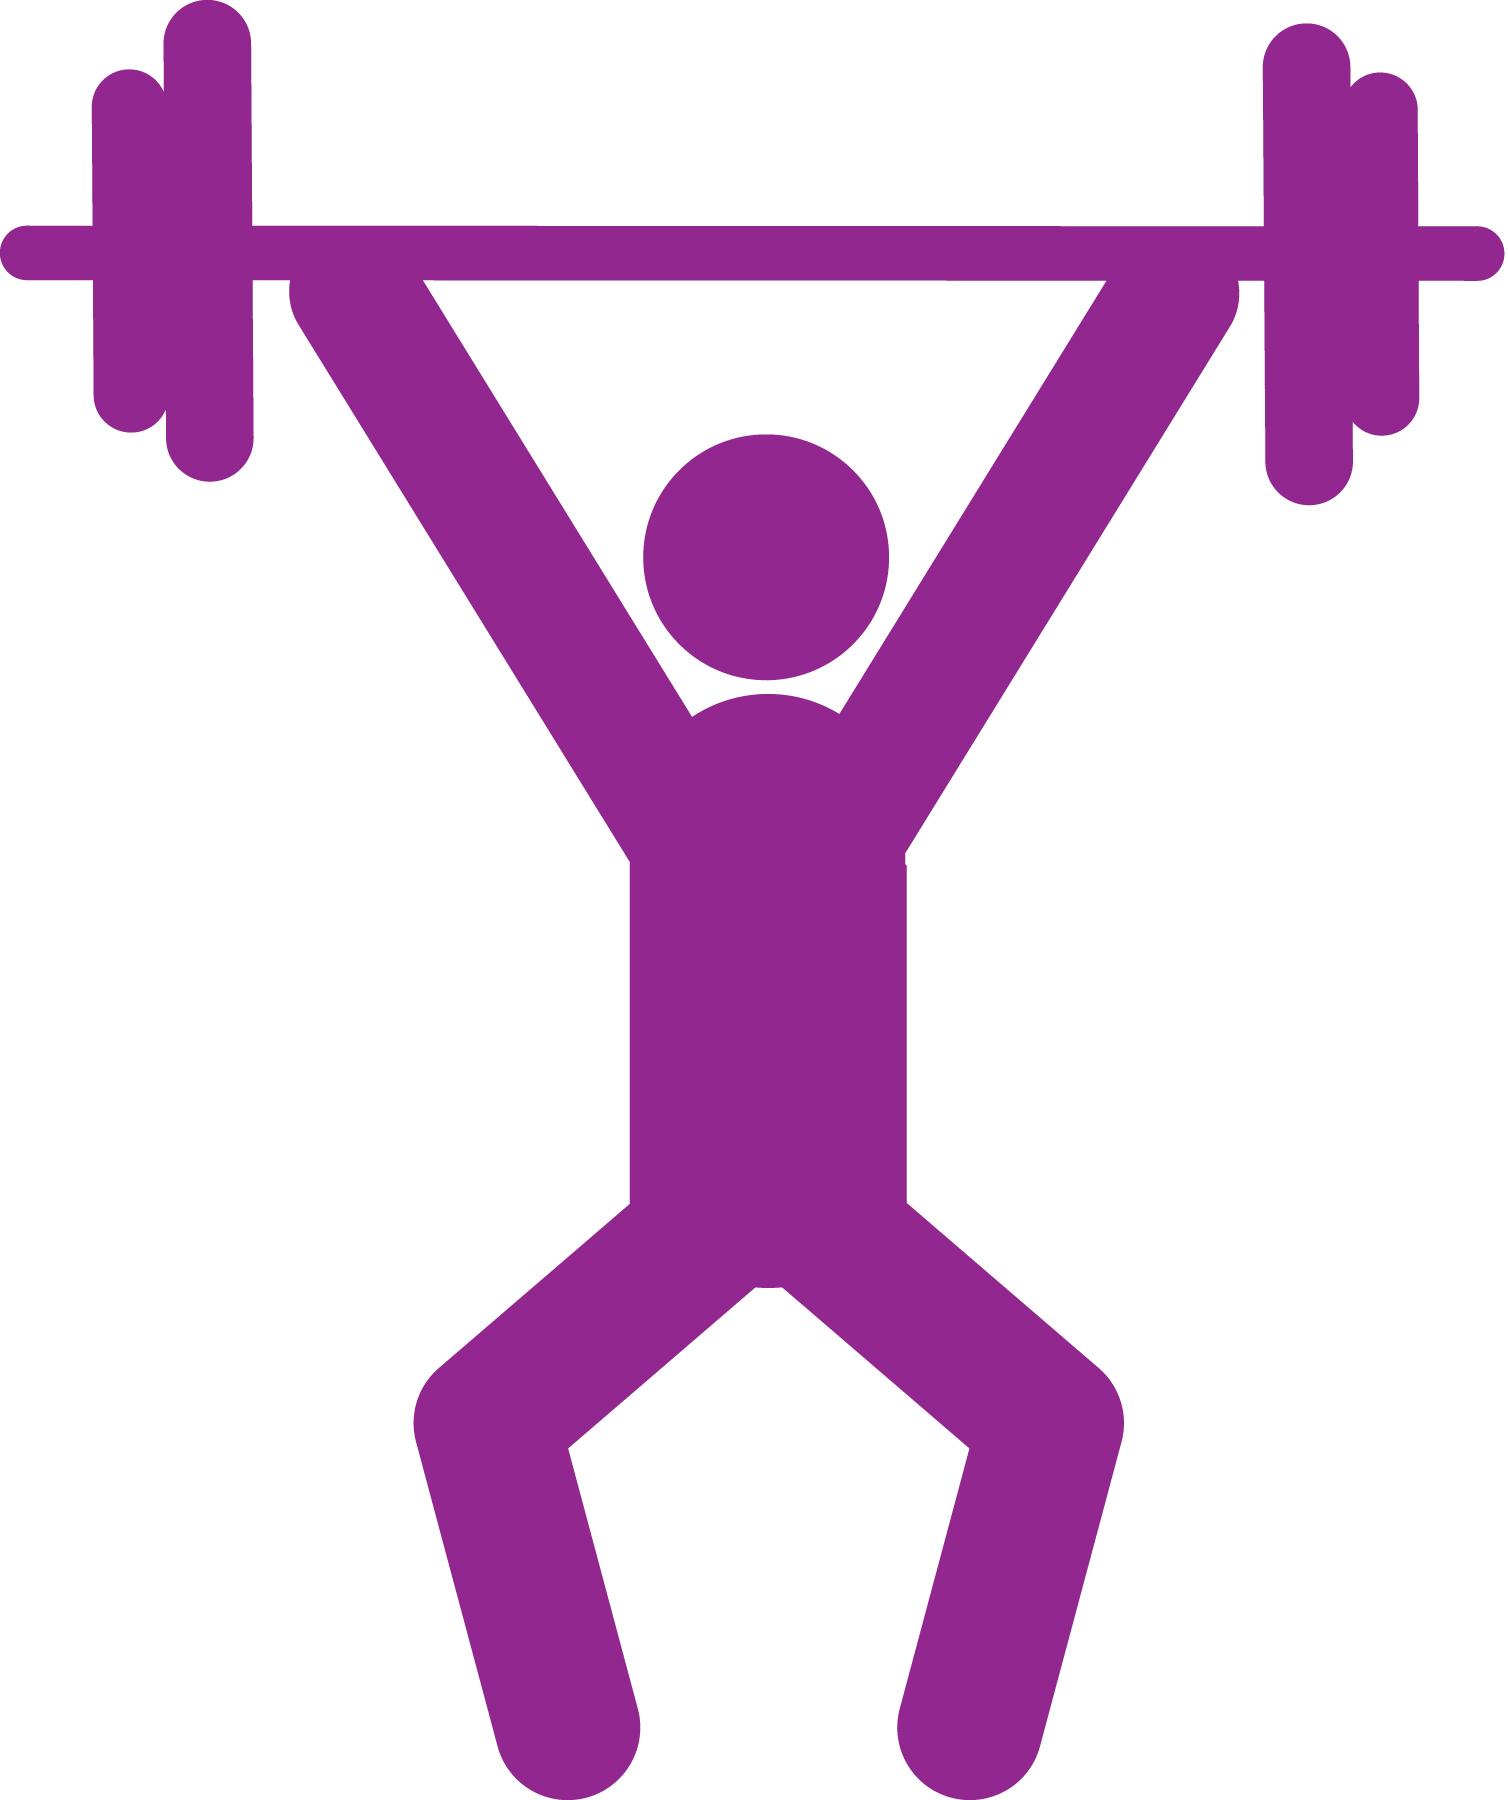 Illustration of weight lifter pressing a bar with plates over head